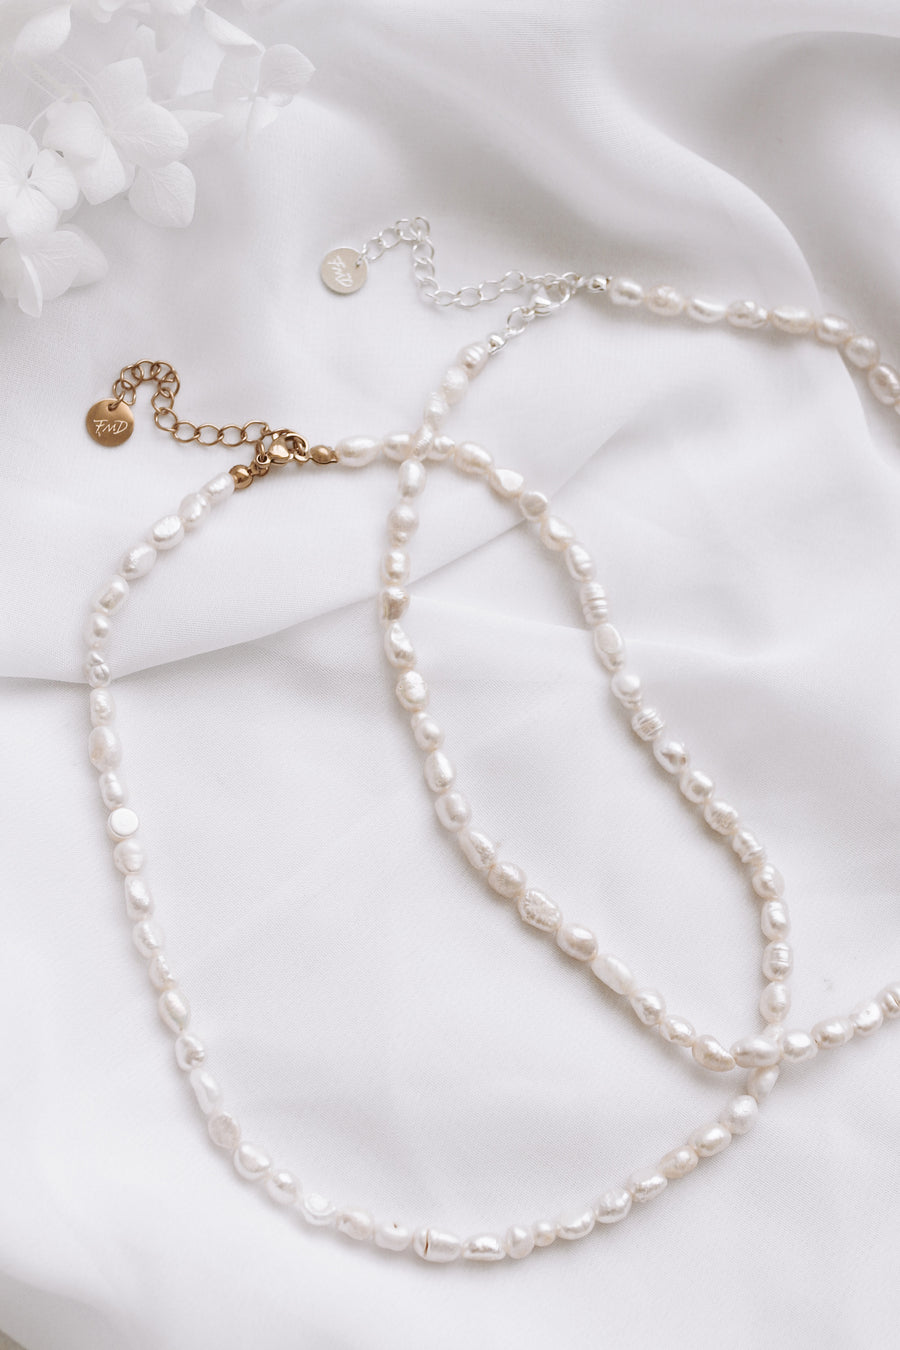 Kady - 18ct Gold or Silver Stainless Steel Pearl Necklace